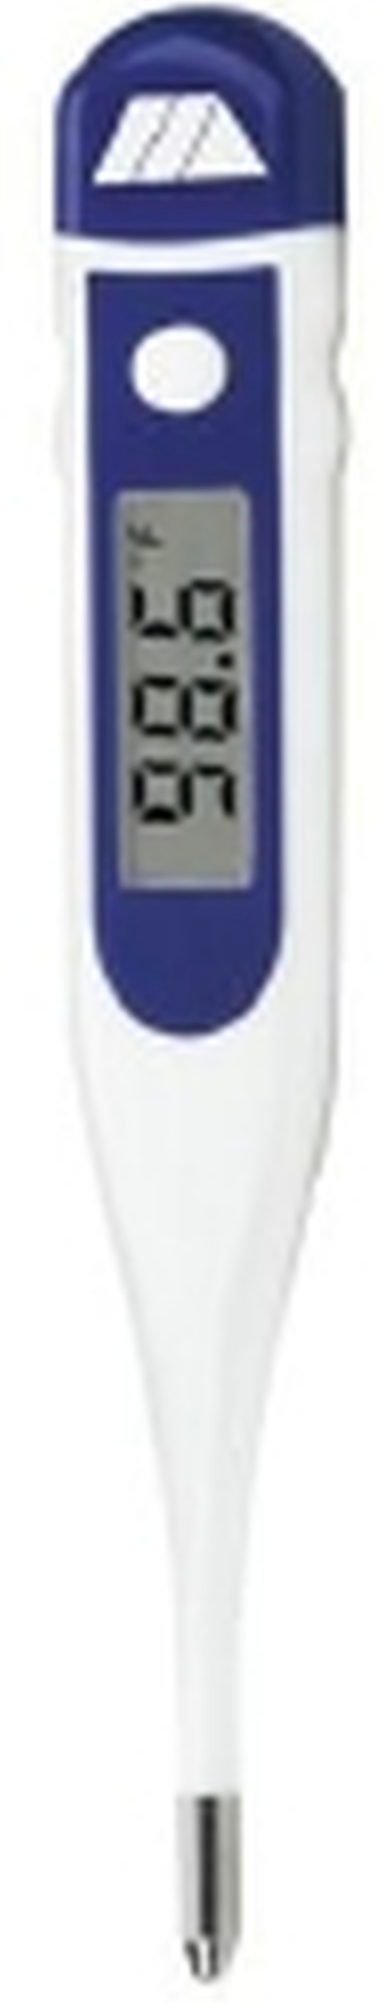 Mabis 9-Second Digital Thermometer